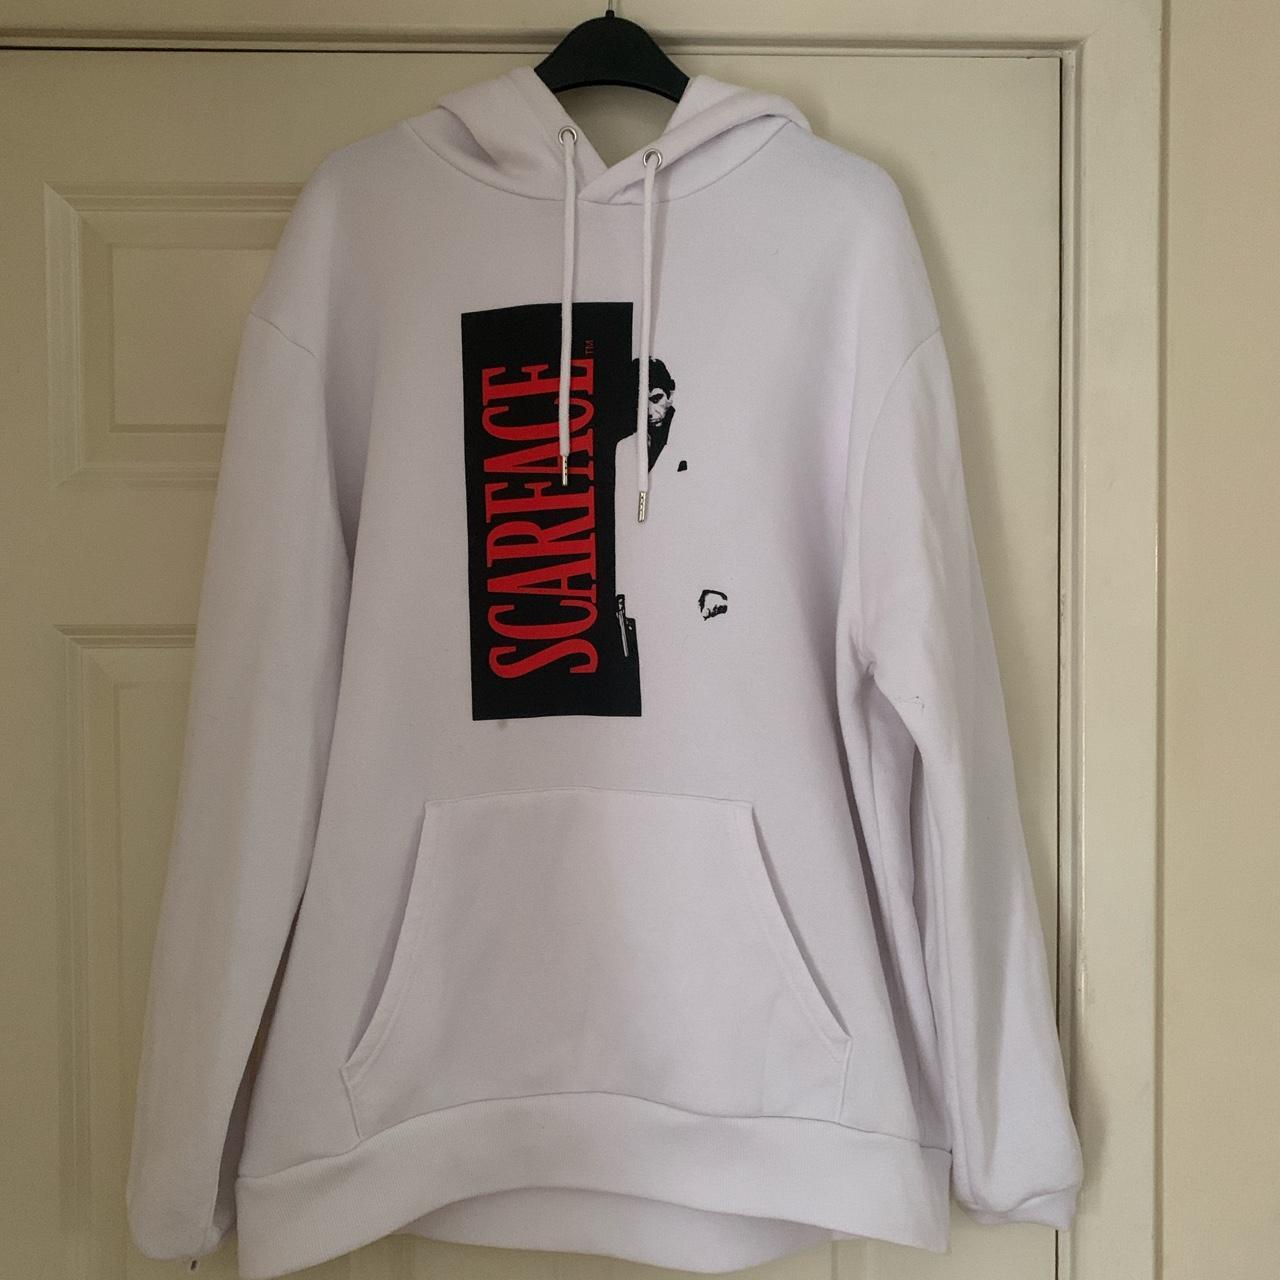 Scarface white hoody in size 2XL Red and black print... - Depop